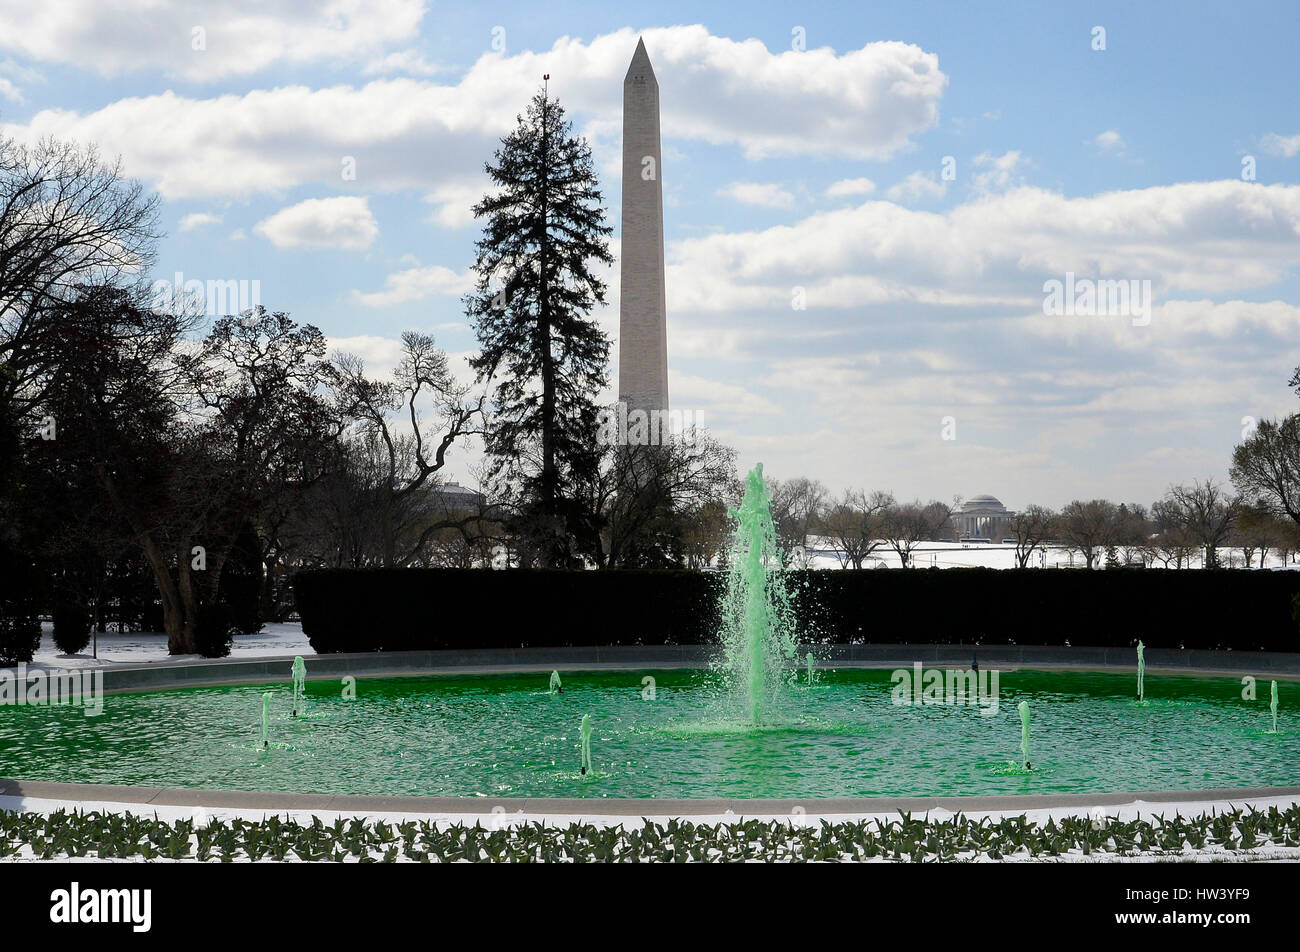 Washington, DC. 16th Mar, 2017. Fountain on the South side of the White House is dyed green for St. Patrick's Day in Washington, DC, on March 16, 2017 in Washington, DC. Credit: Olivier Douliery/Pool via CNP - NO WIRE SERVICE- Photo: Olivier Douliery/Consolidated News Photos/Olivier Douliery - Pool via CNP/dpa/Alamy Live News Stock Photo